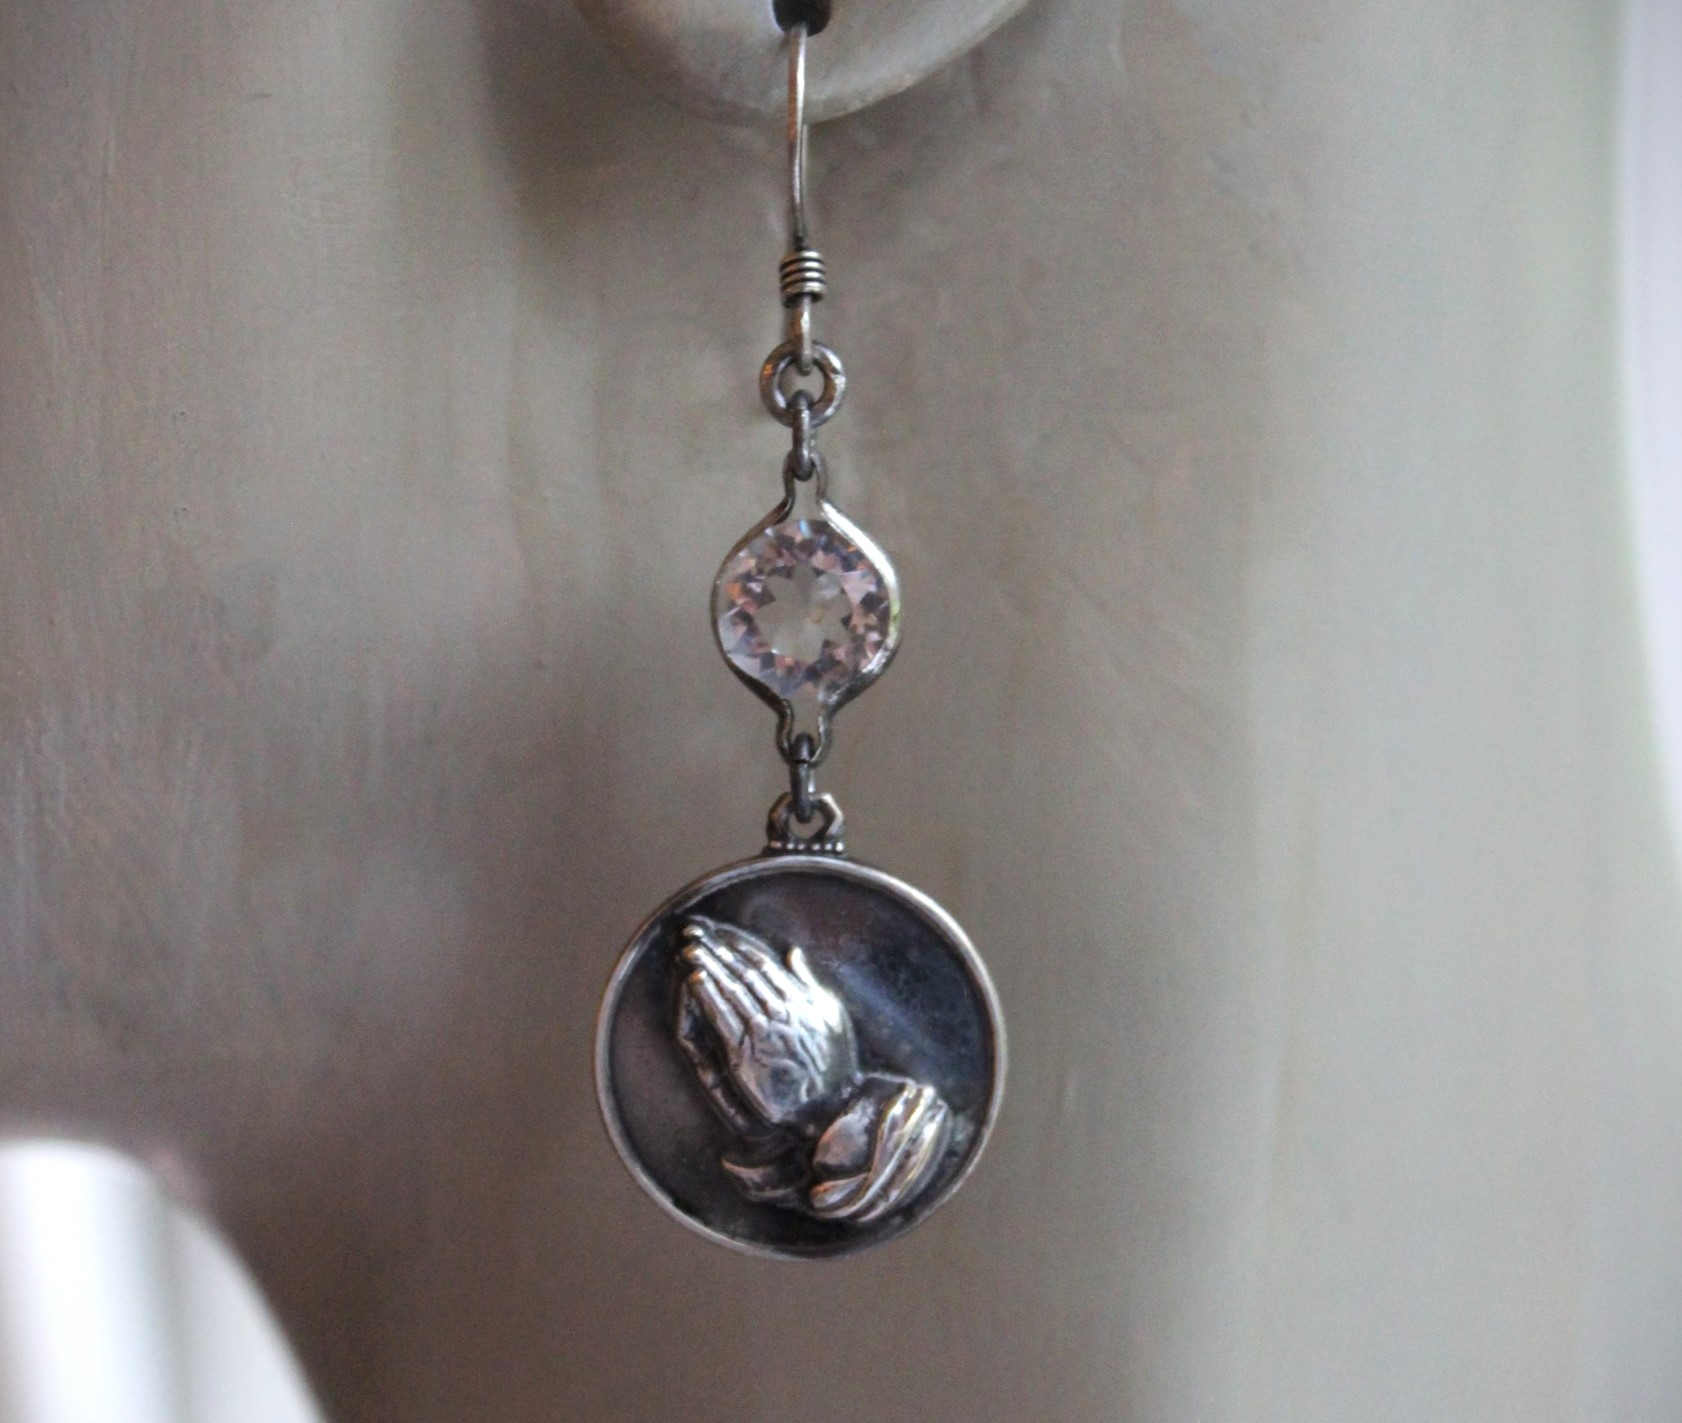 Serenity Prayer Earrings with Sterling Engraved Praying Hands Medals,Antique Faceted Rock Crystal Connectors,Sterling Earring Wires